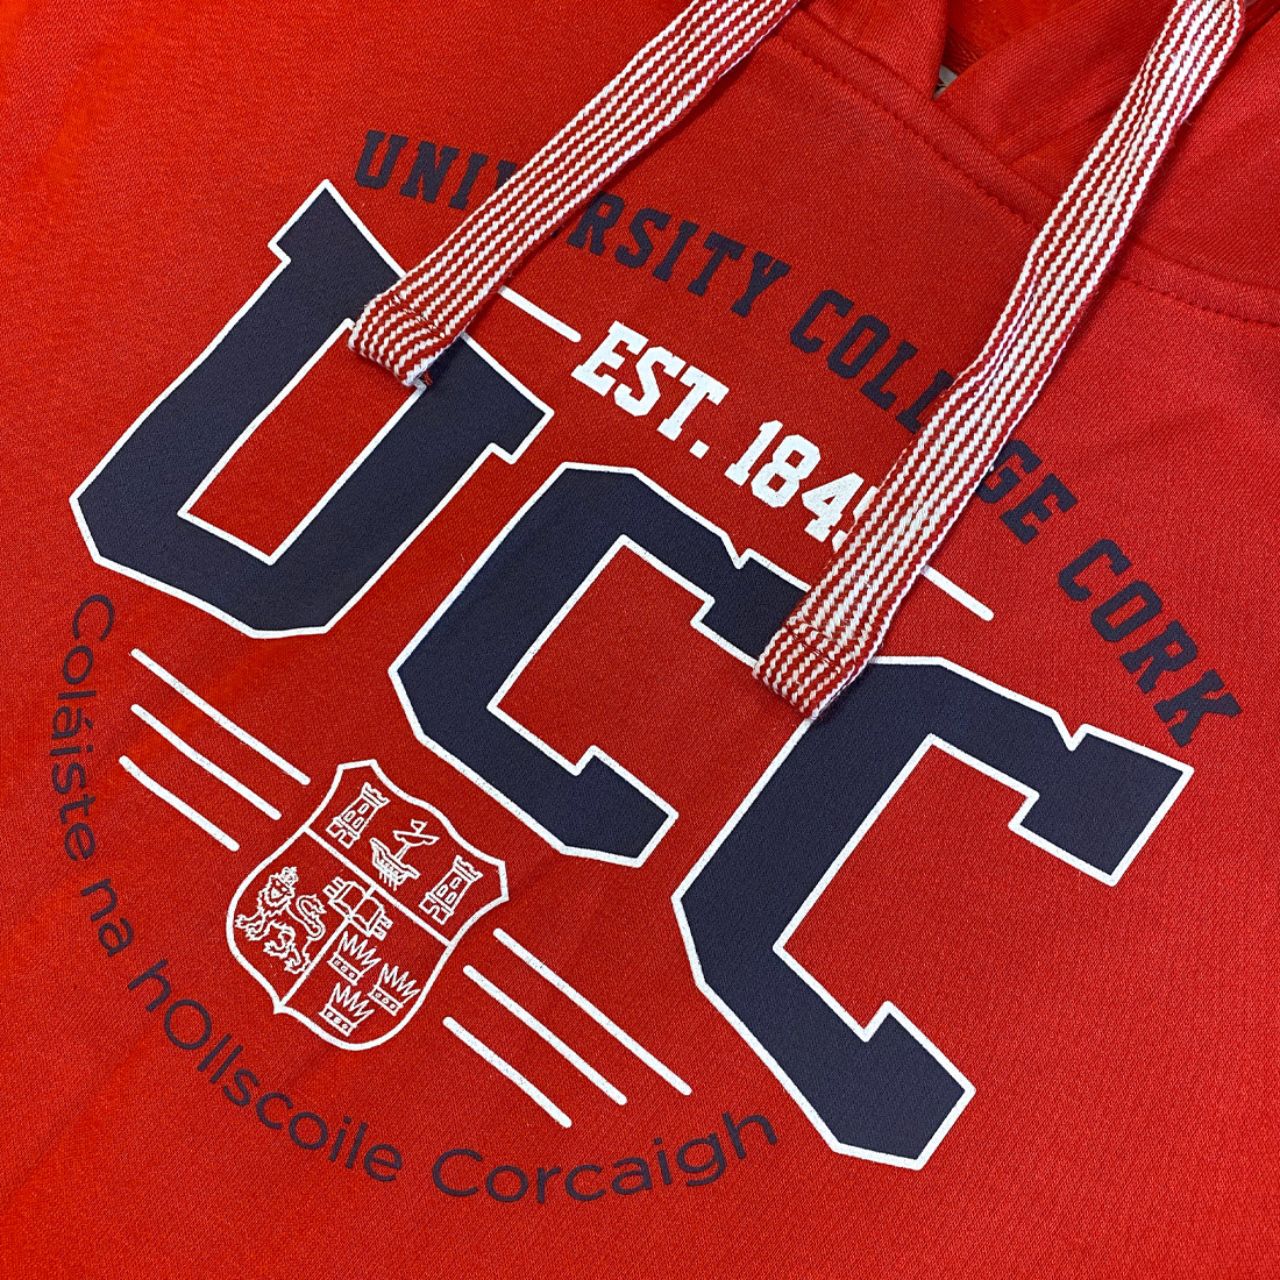 This UCC College Hoodie Est 1845 - Red is an official addition to the collection. Its relaxed fit showcases a printed UCC crest, UCC back neck label, contrasting draw strings, and a pocket with a UCC woven label.